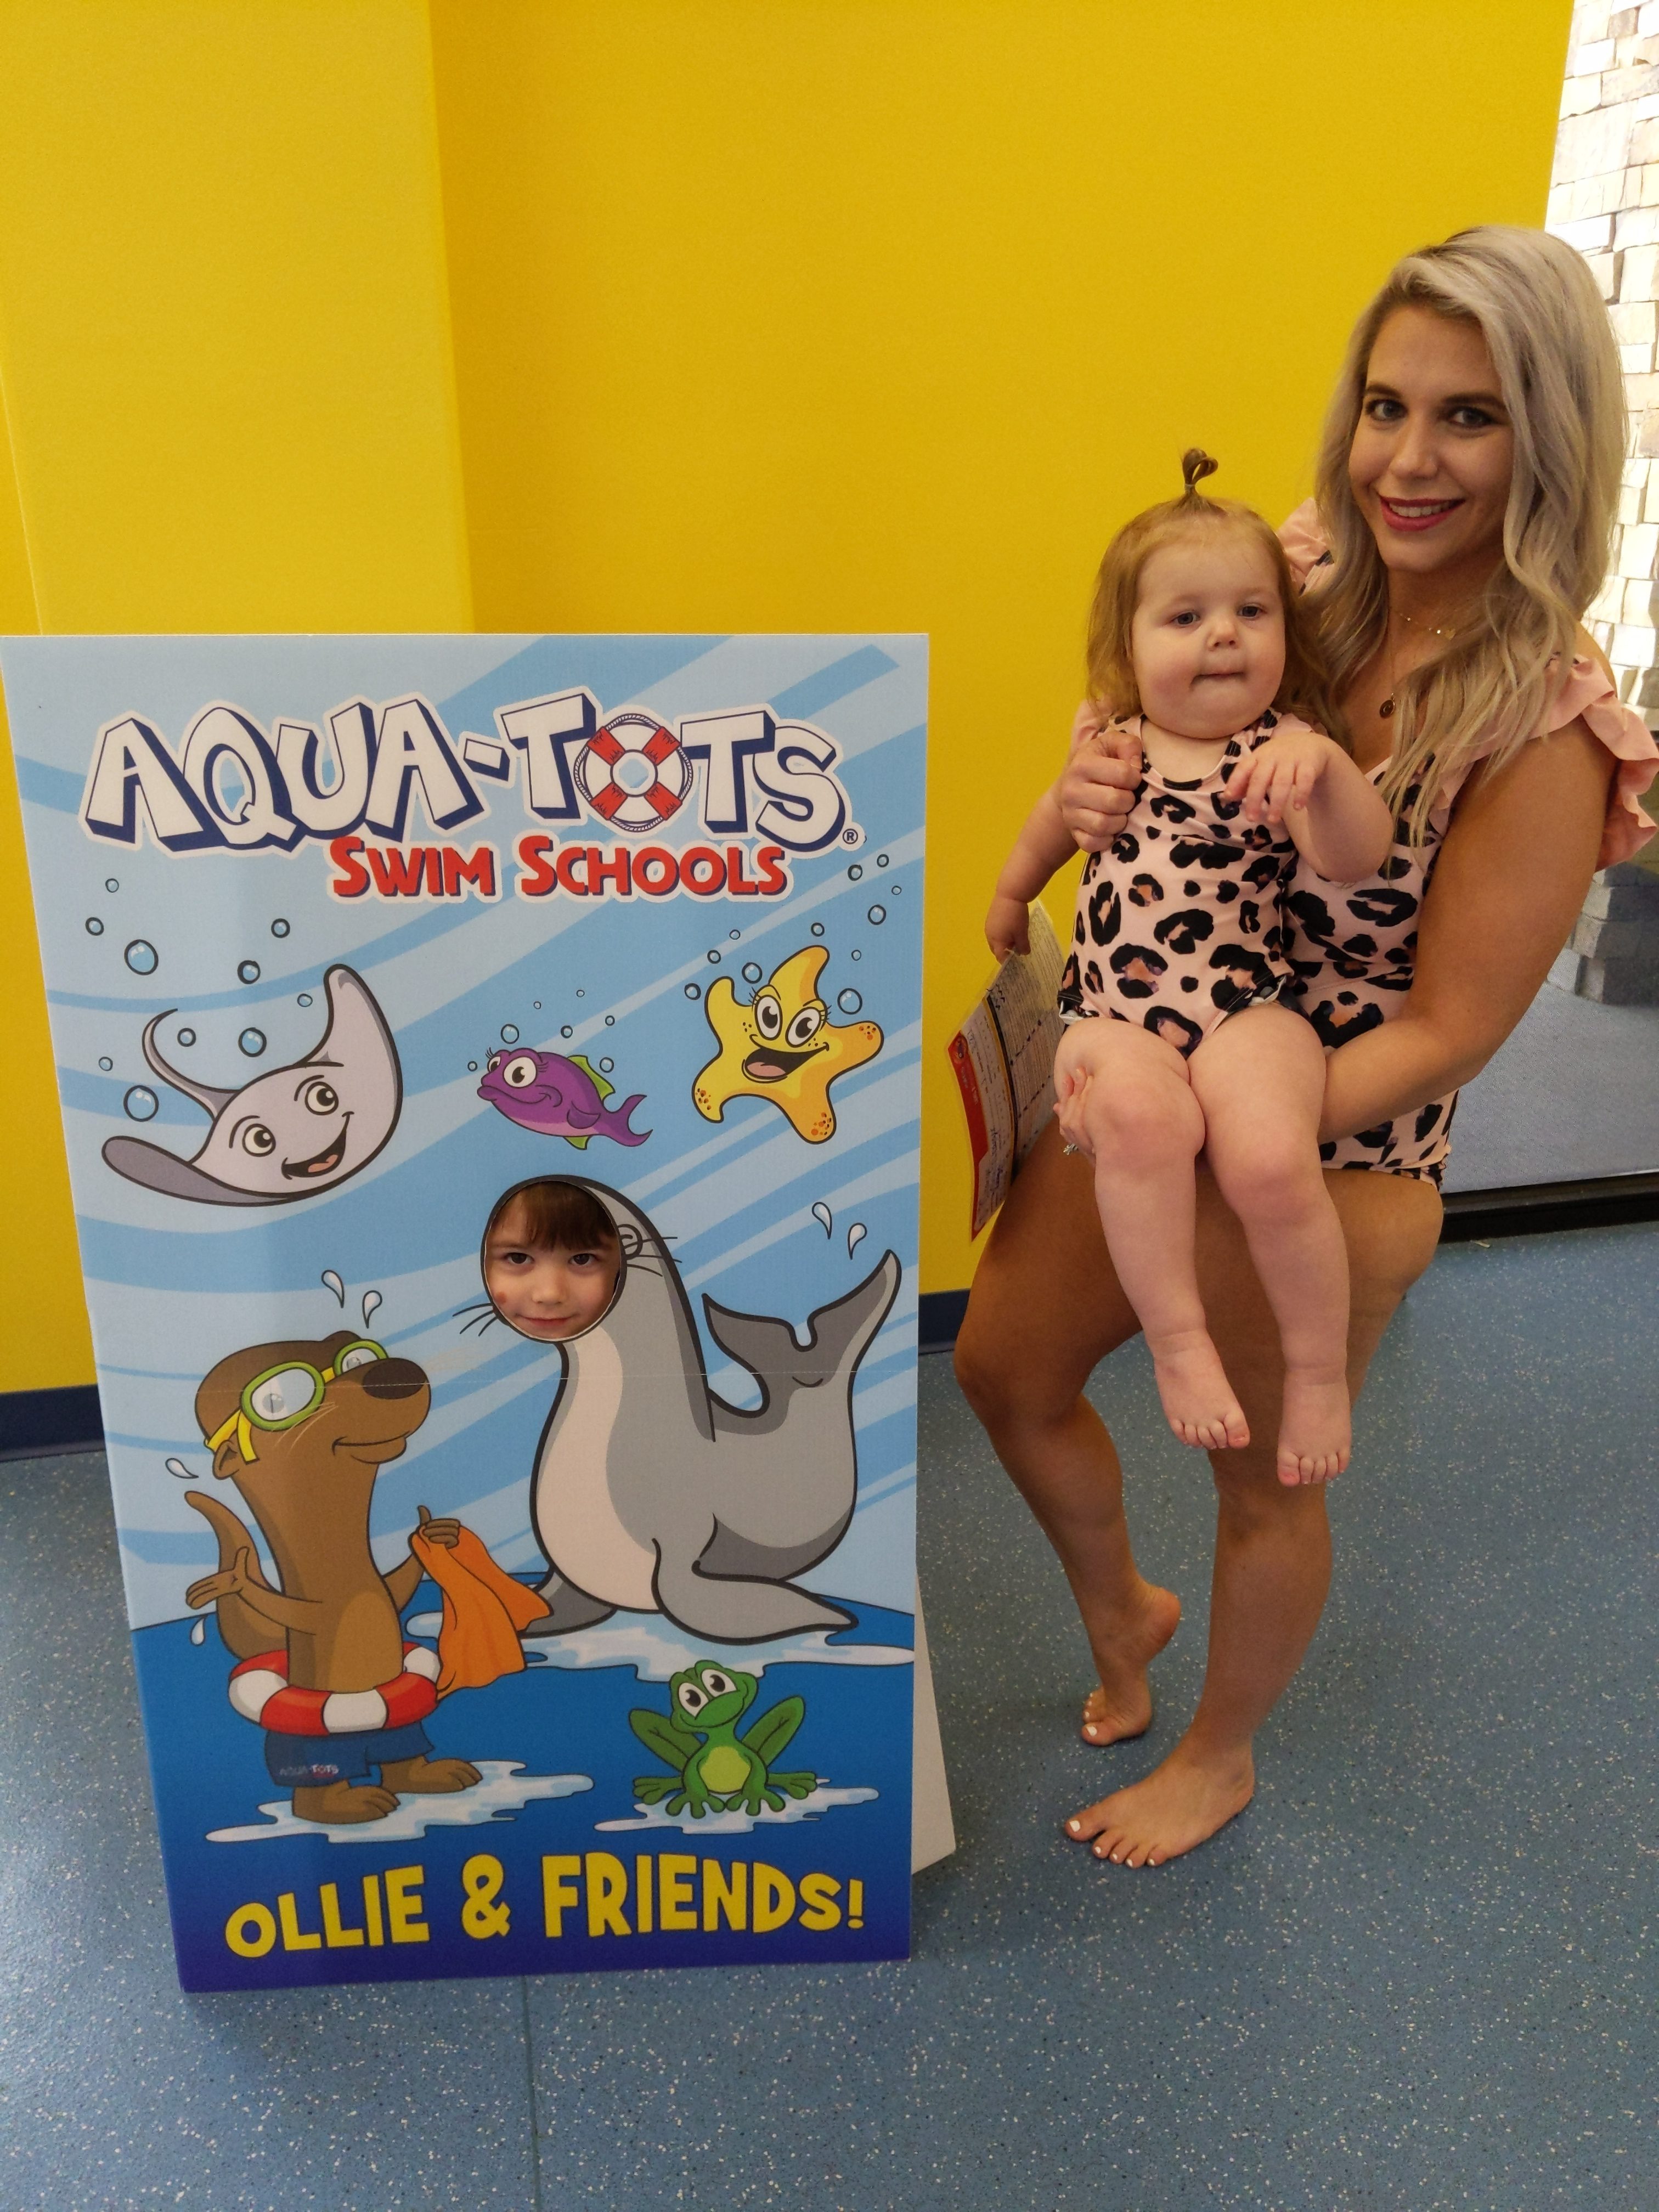 Water Safety Tips for Toddlers: May is National Drowning Prevention Month, so it's time to review water safety tips! Blogger shares water safety tips for toddlers learned from swim lessons at Aqua-Tots Swim Schools in Olathe, Kansas. #swimming #swimlessons #watersafety #toddlers 